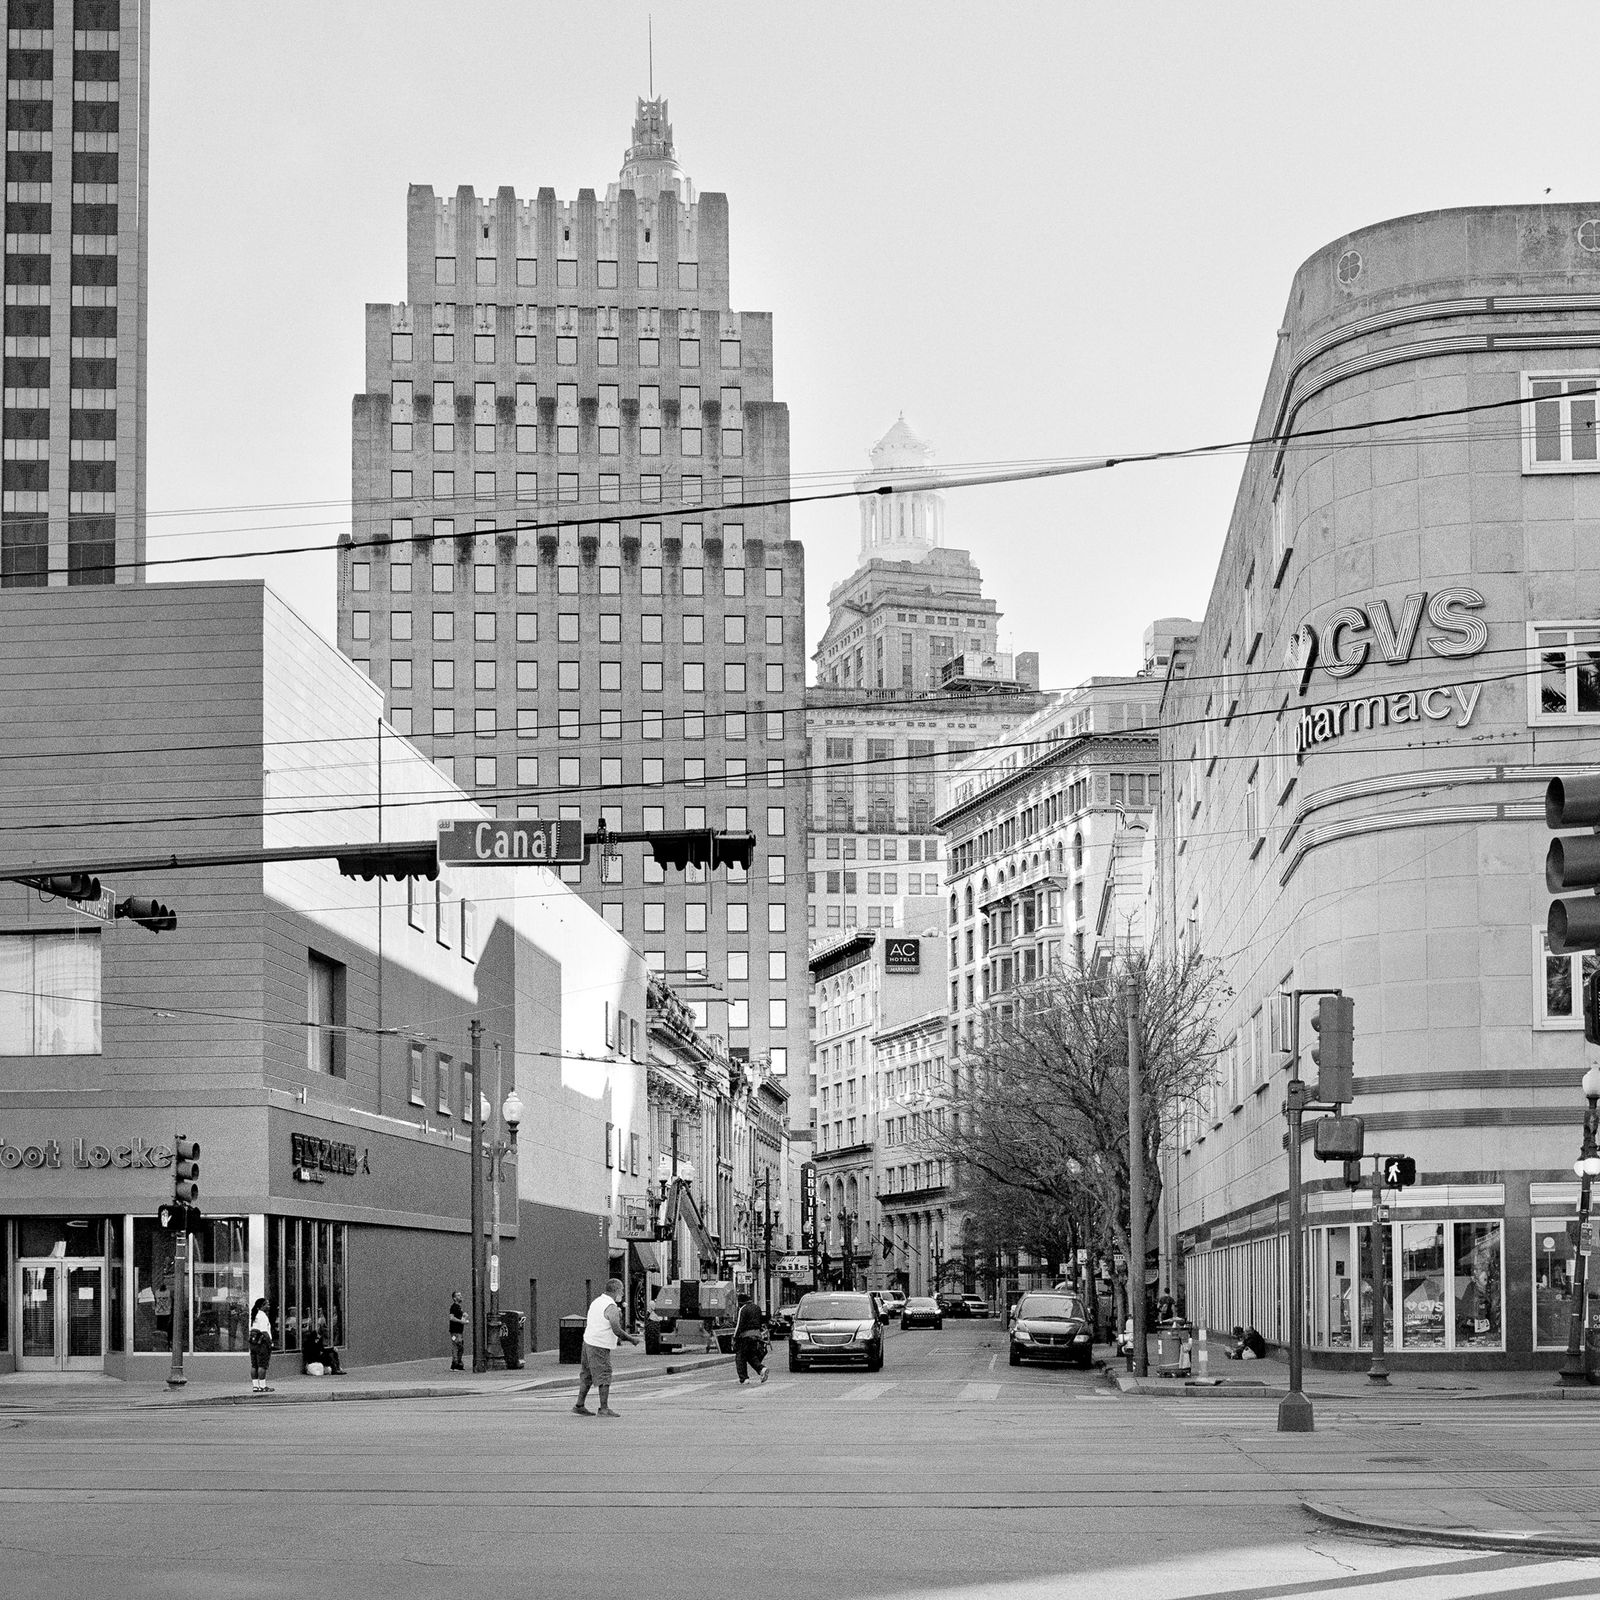 © Jonathan Traviesa - "Canal and Baronne with Hibernia Bank Tower" (from LOW HUSTLE HOT CENTER)